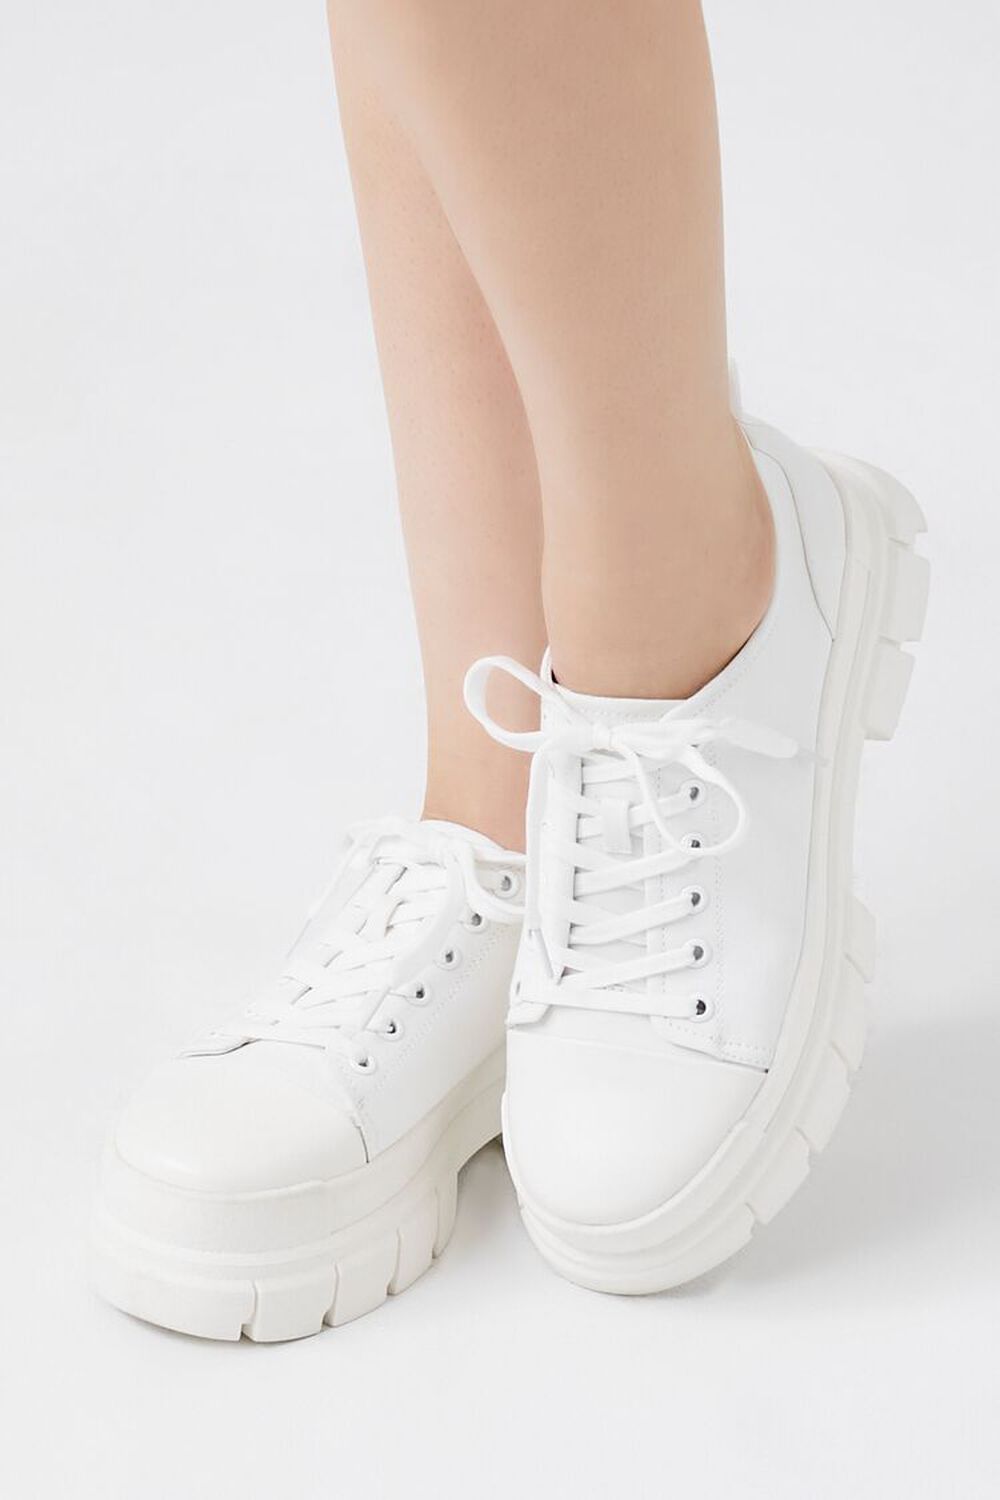 WHITE Lace-Up Lug-Sole Sneakers, image 1